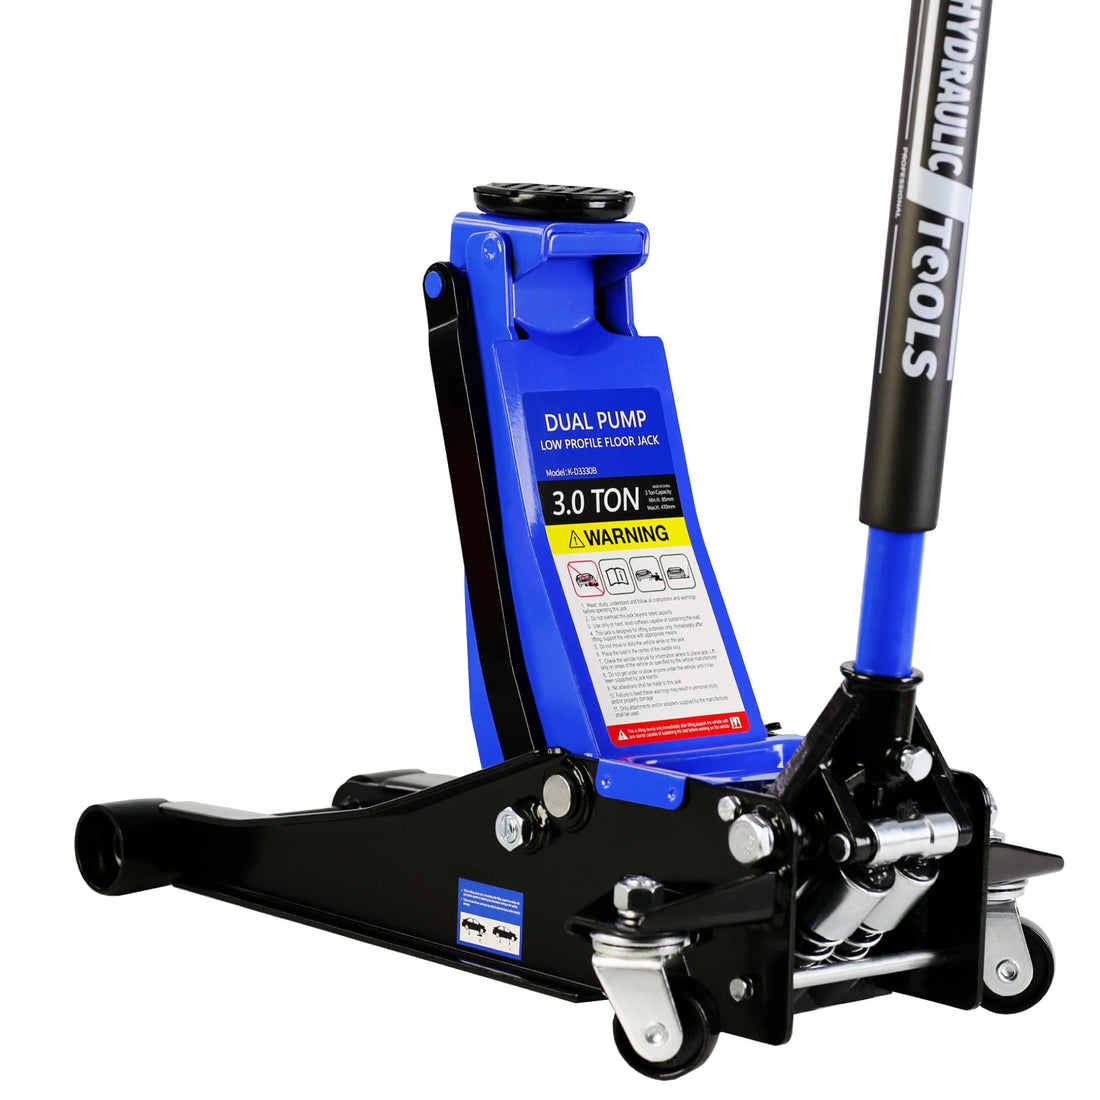 3 Ton Low Profile Floor Jack Capacity 6600 lbs with Dual Piston,Steady Steel Quick Lift Pump 3.3-18.5 Inch Lifting Range Height,Black+Blue